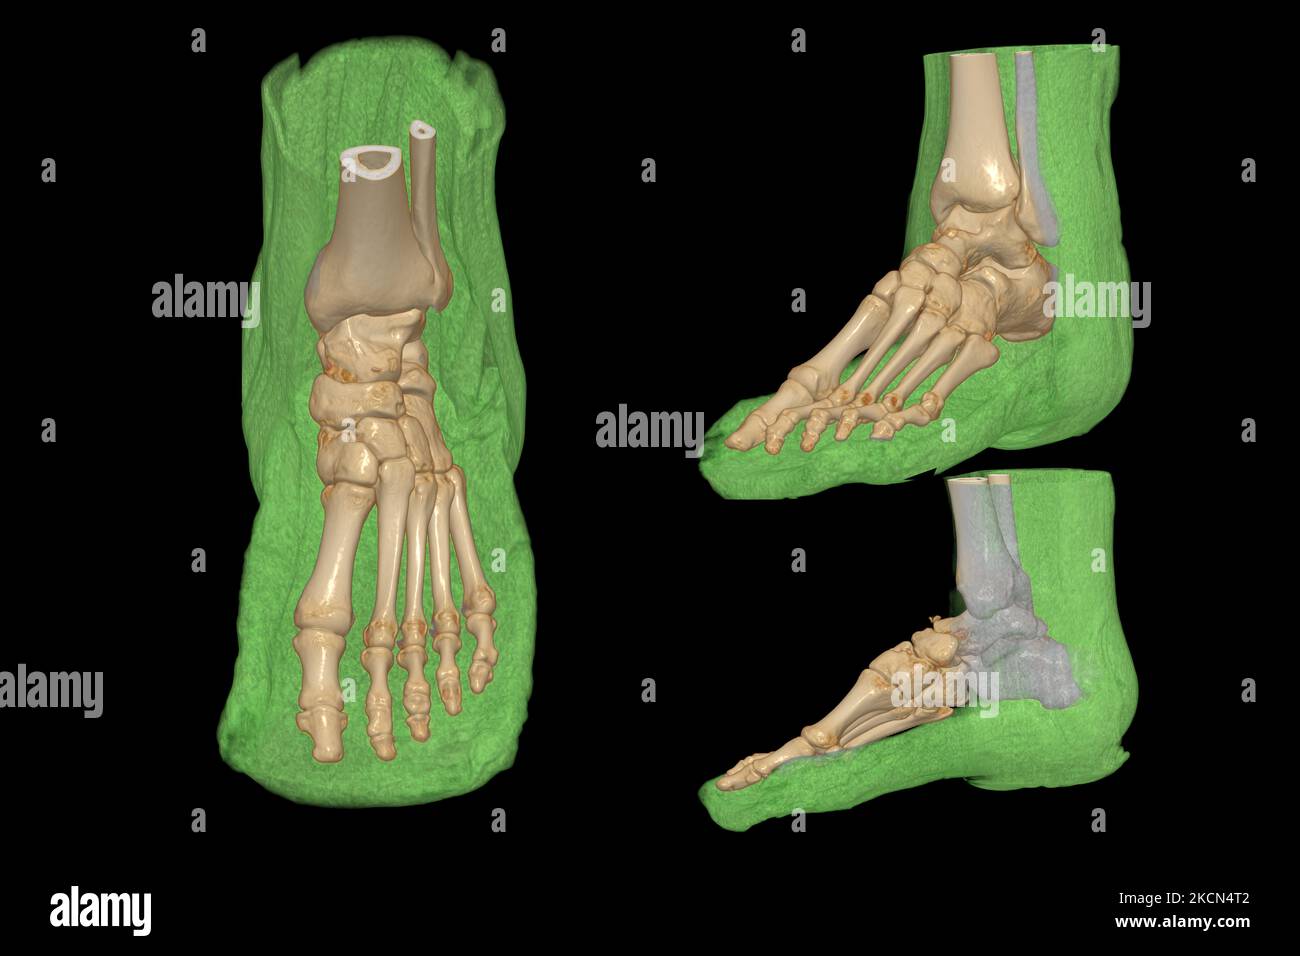 3D rendering  of the foot bones for diagnosis bone fracture and rheumatoid arthritis from CT scannner. Stock Photo